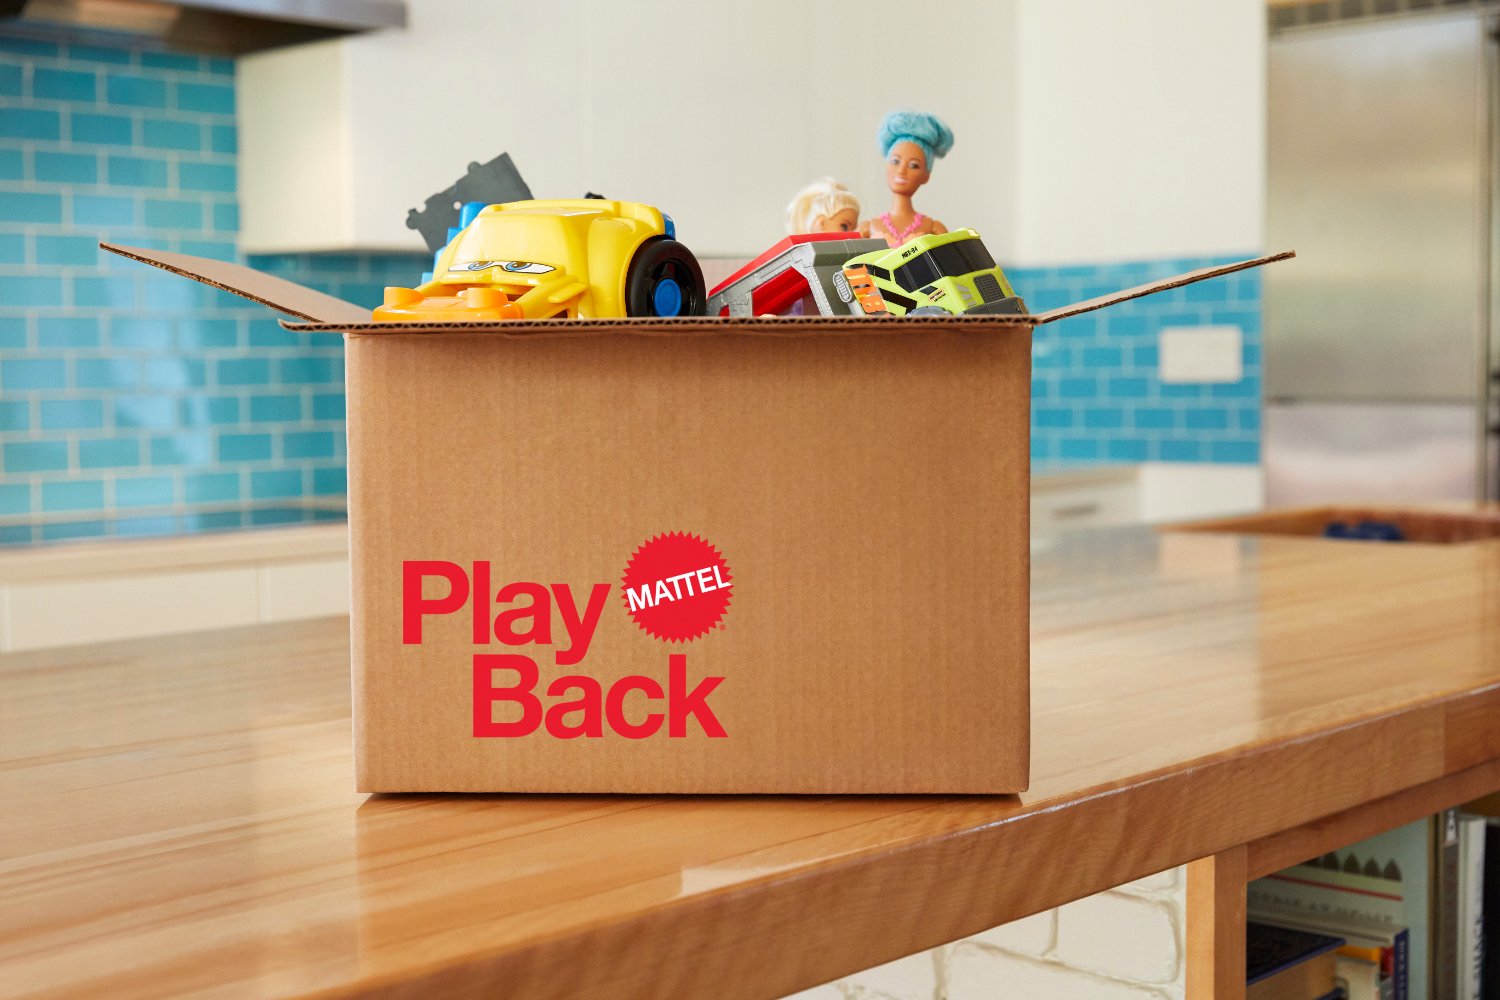 Mattel Launches Toy Recycling Program ‘PlayBack’